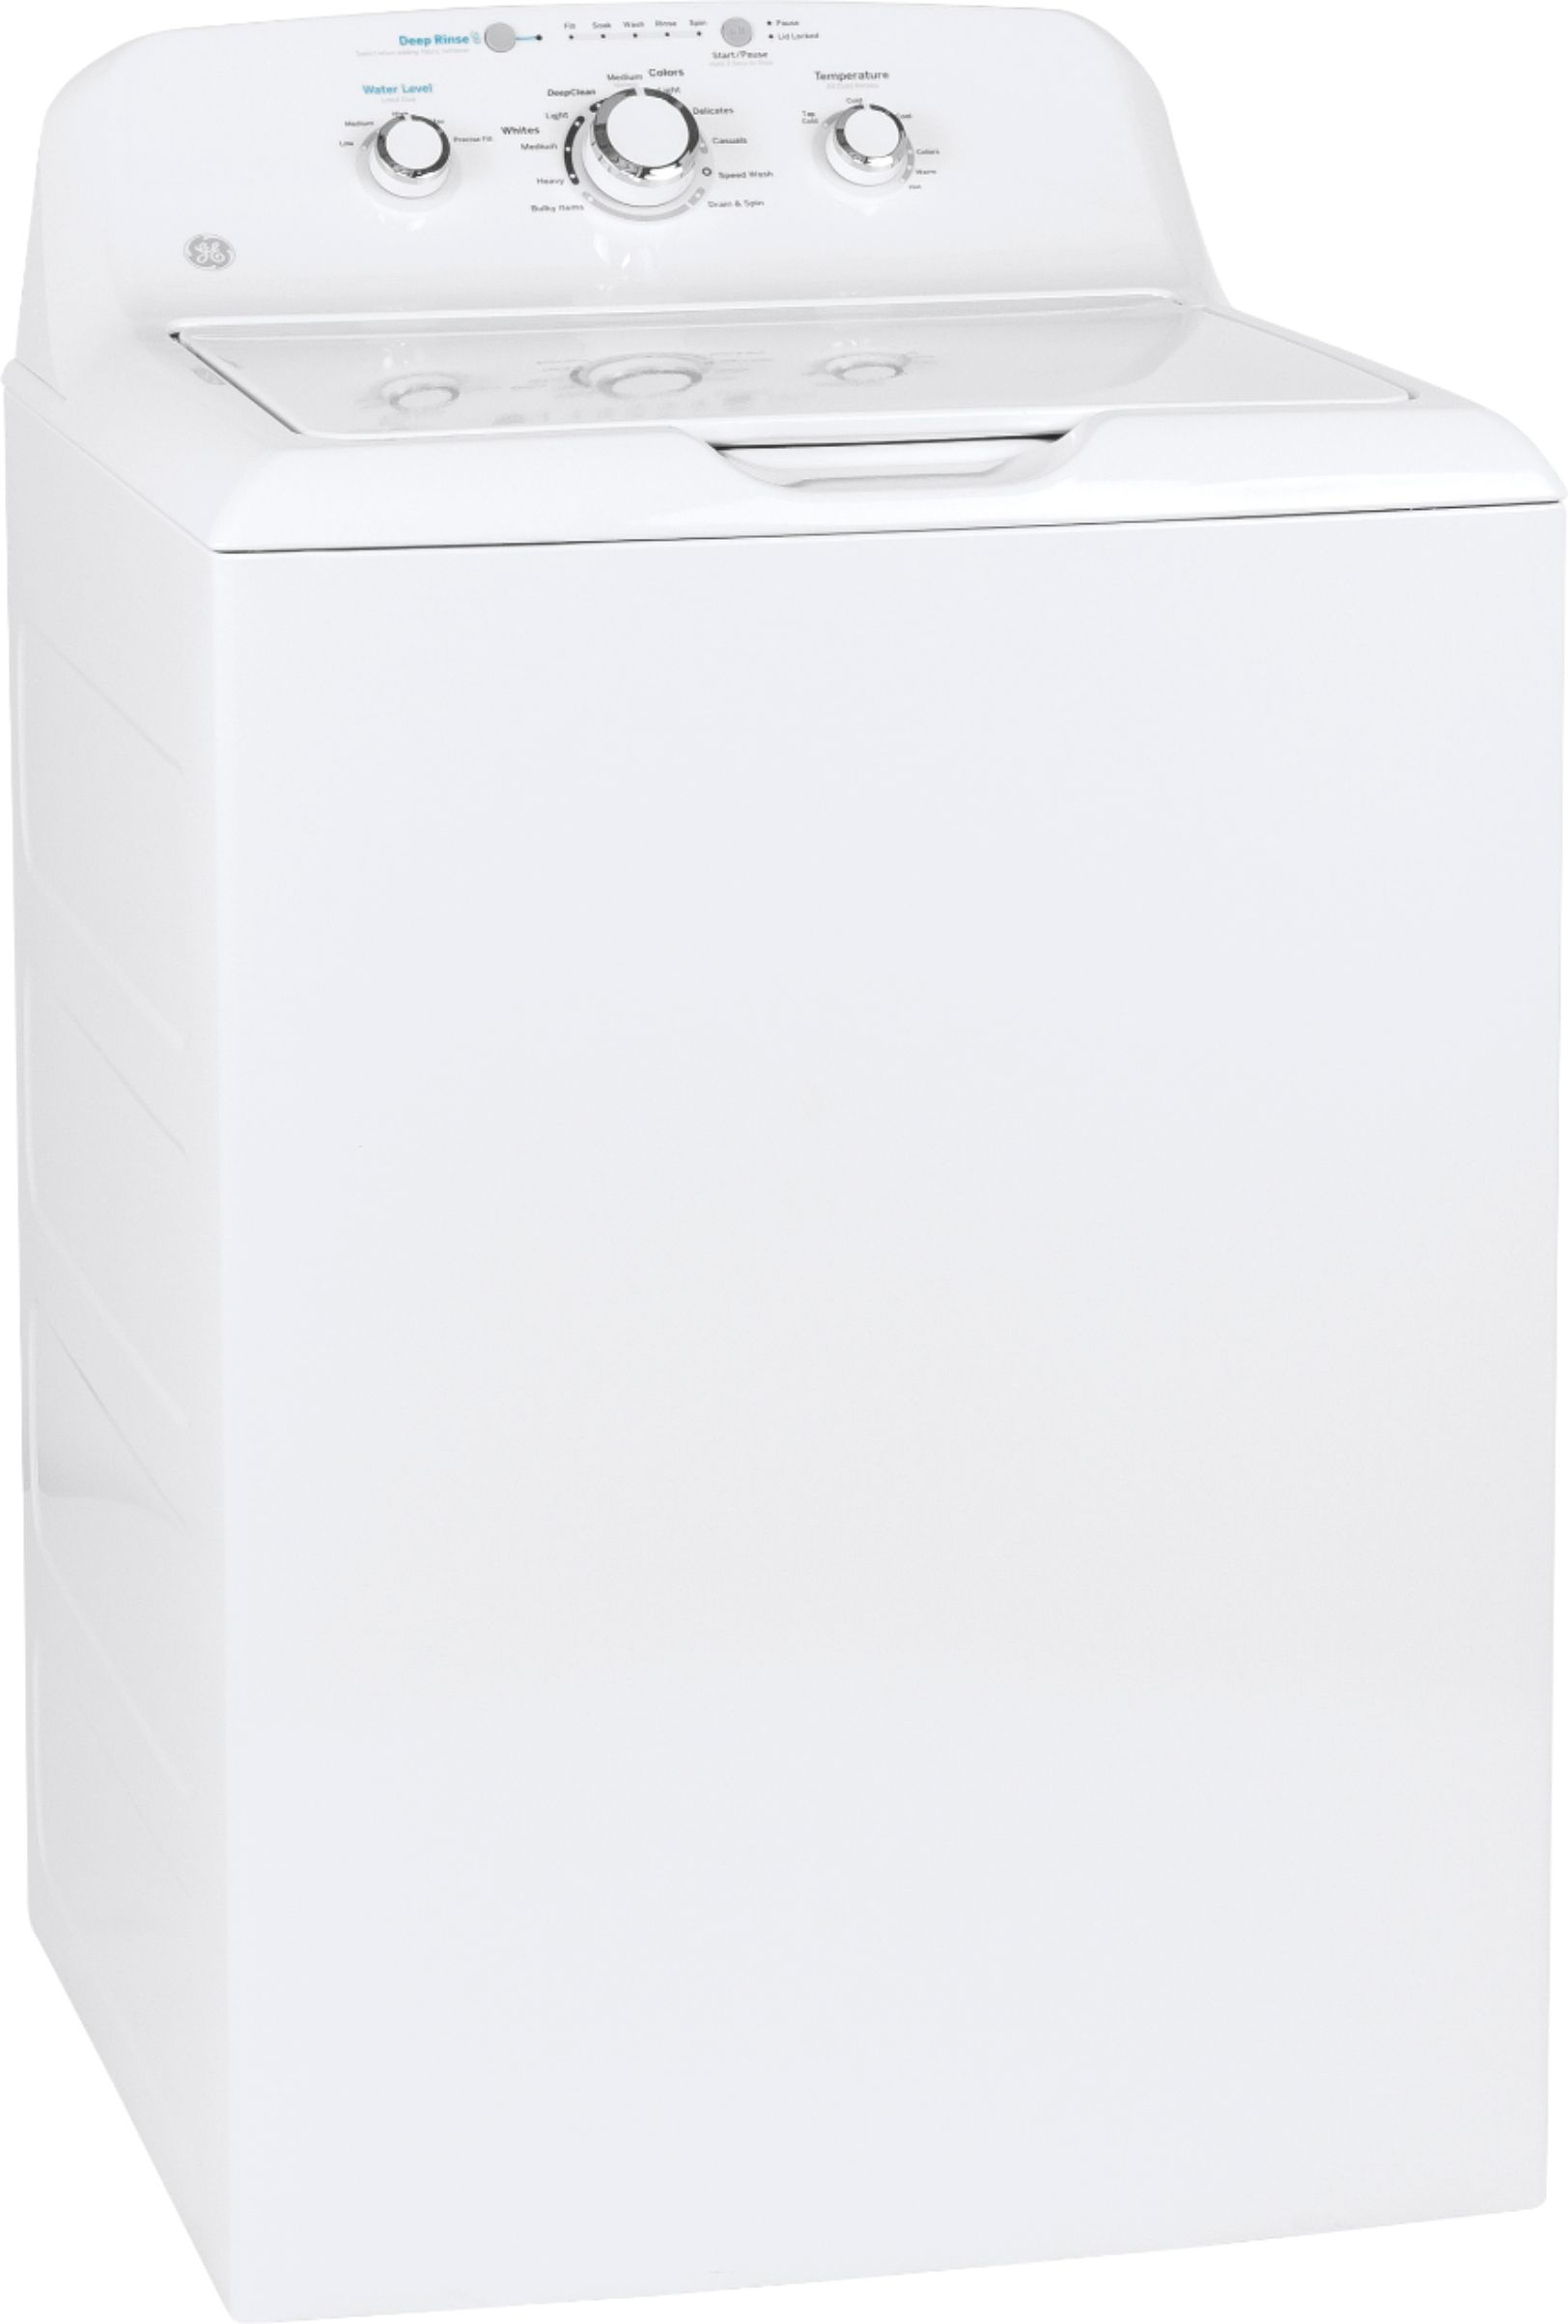 Angle View: GE - 4.2 Cu. Ft. Top Load Washer with Precise Fill & Deep Rinse - White on White